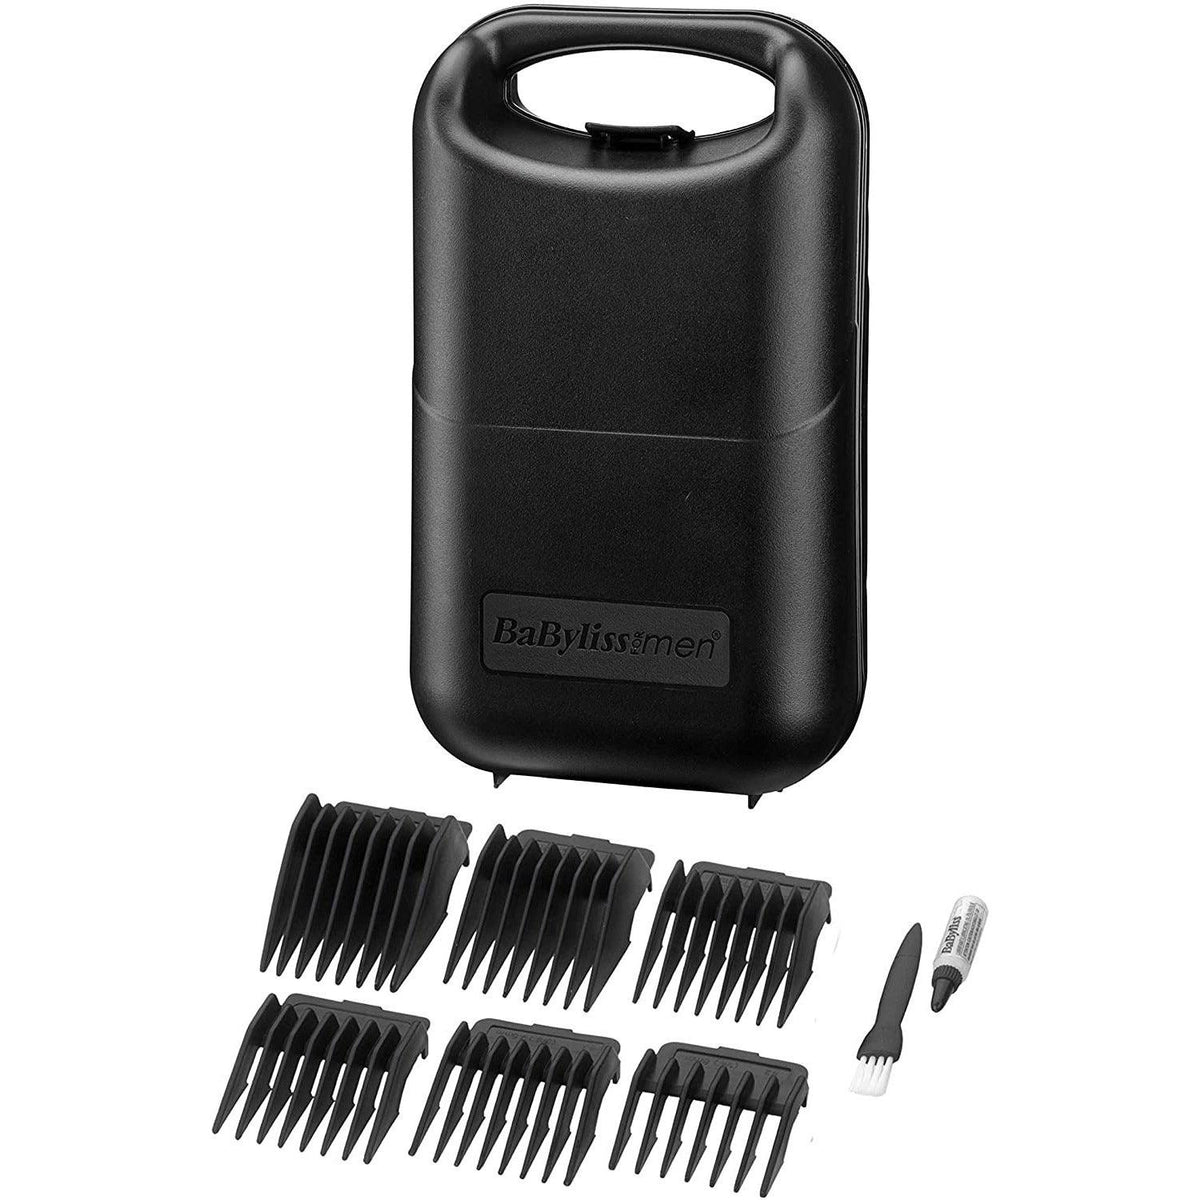 Babyliss Powerblade Pro Hair Clipper - Black | 7456U from DID Electrical - guaranteed Irish, guaranteed quality service. (6890856153276)